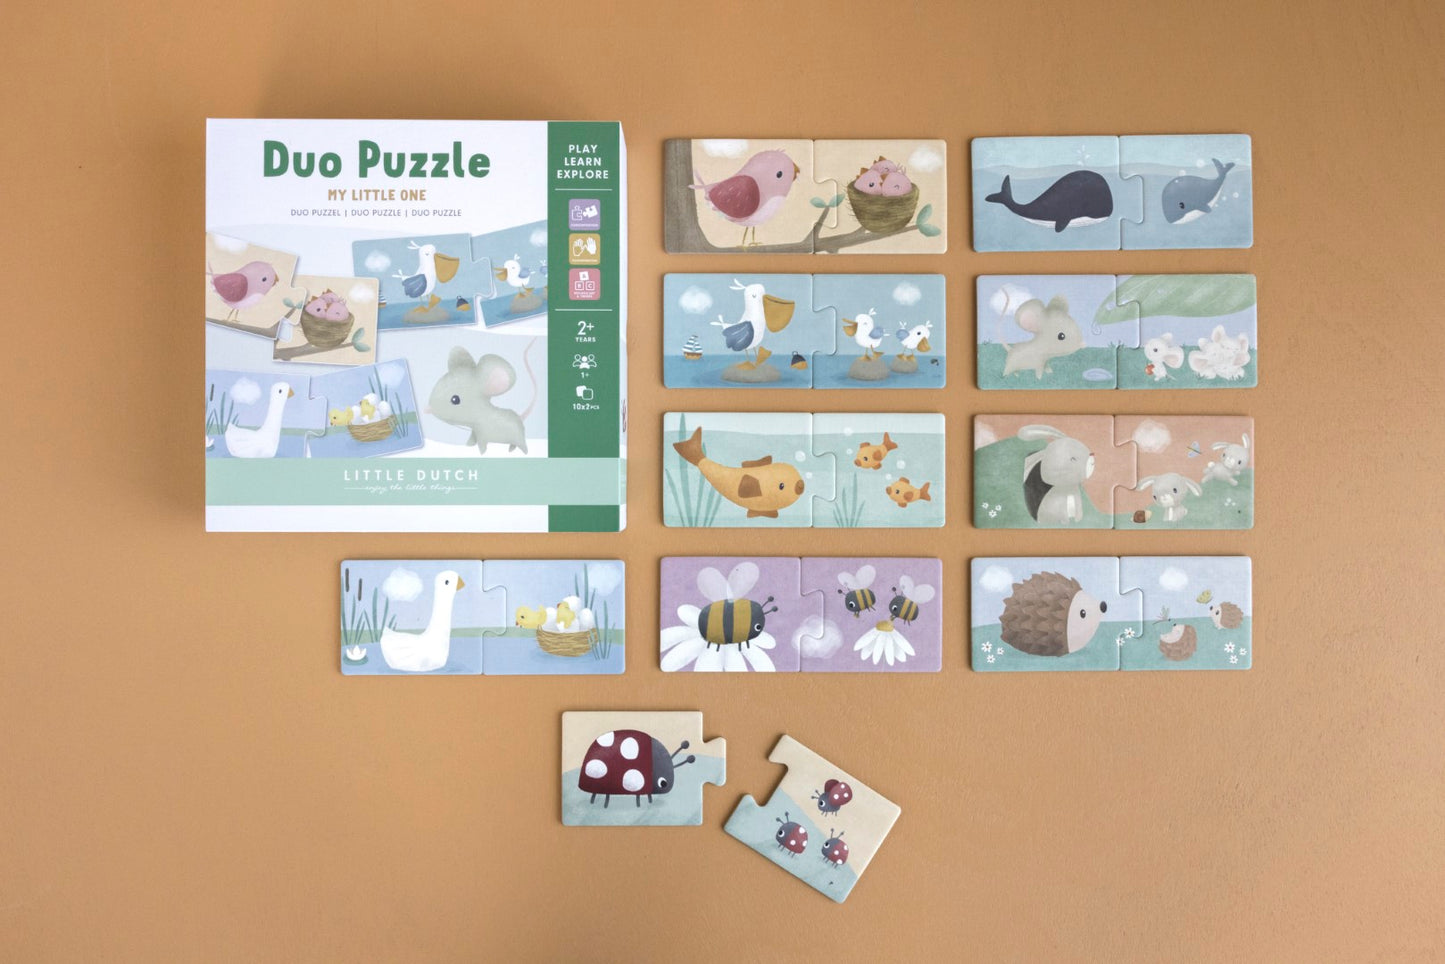 Little Dutch Duo Puzzle "My Little One"